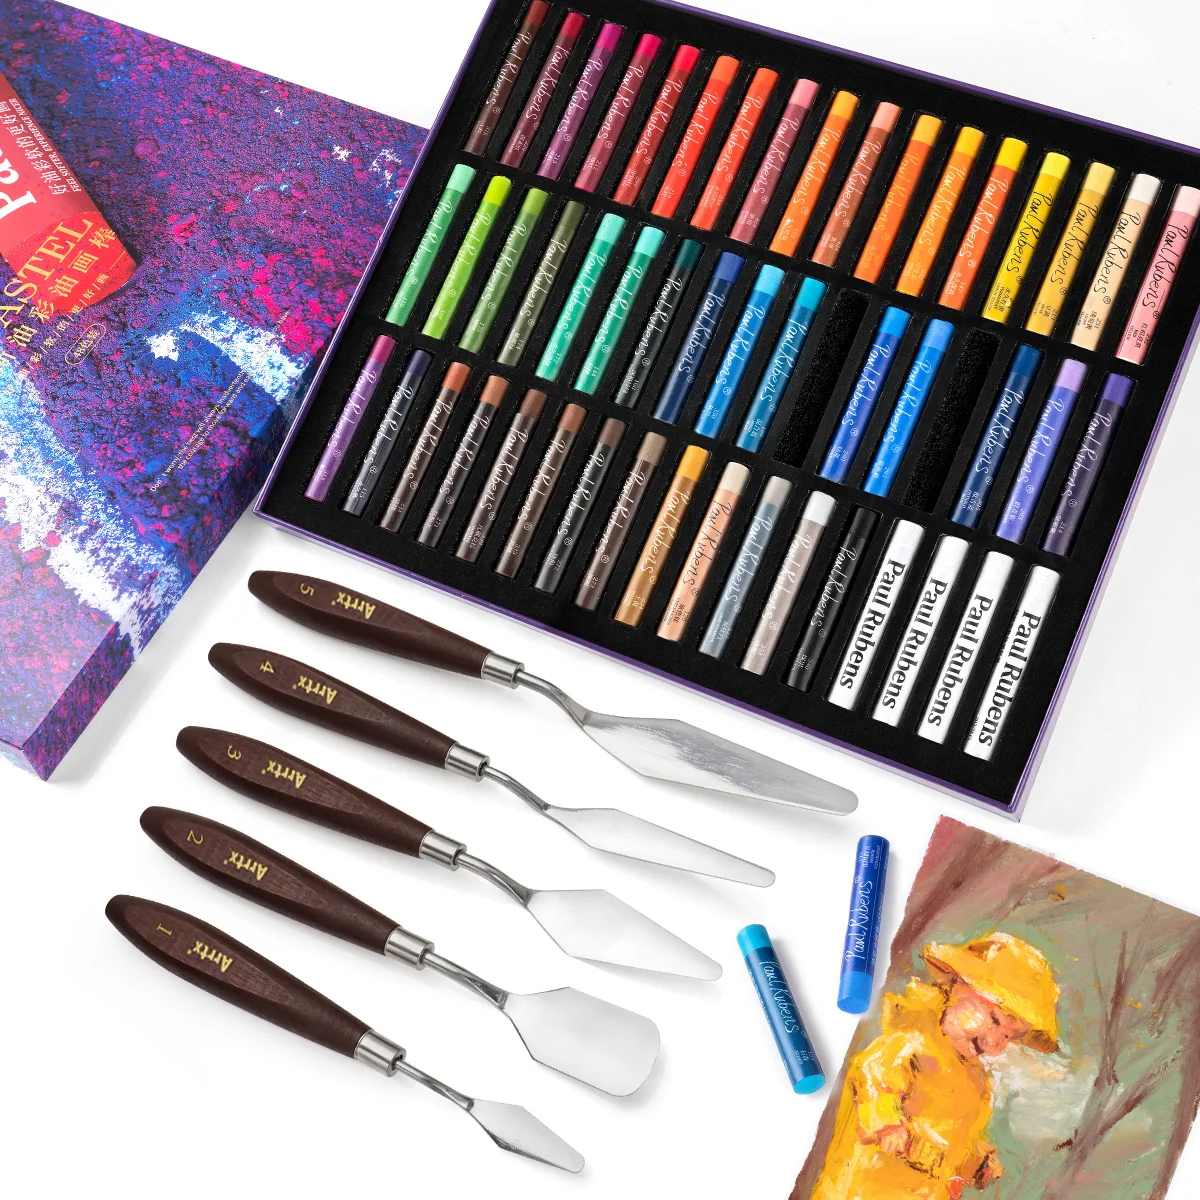 

50 Colors Graffiti Soft Oil Pastel Paul Rubens Professional Painting Pastel Crayon+5PCS Mixed Palette Knife Stainless